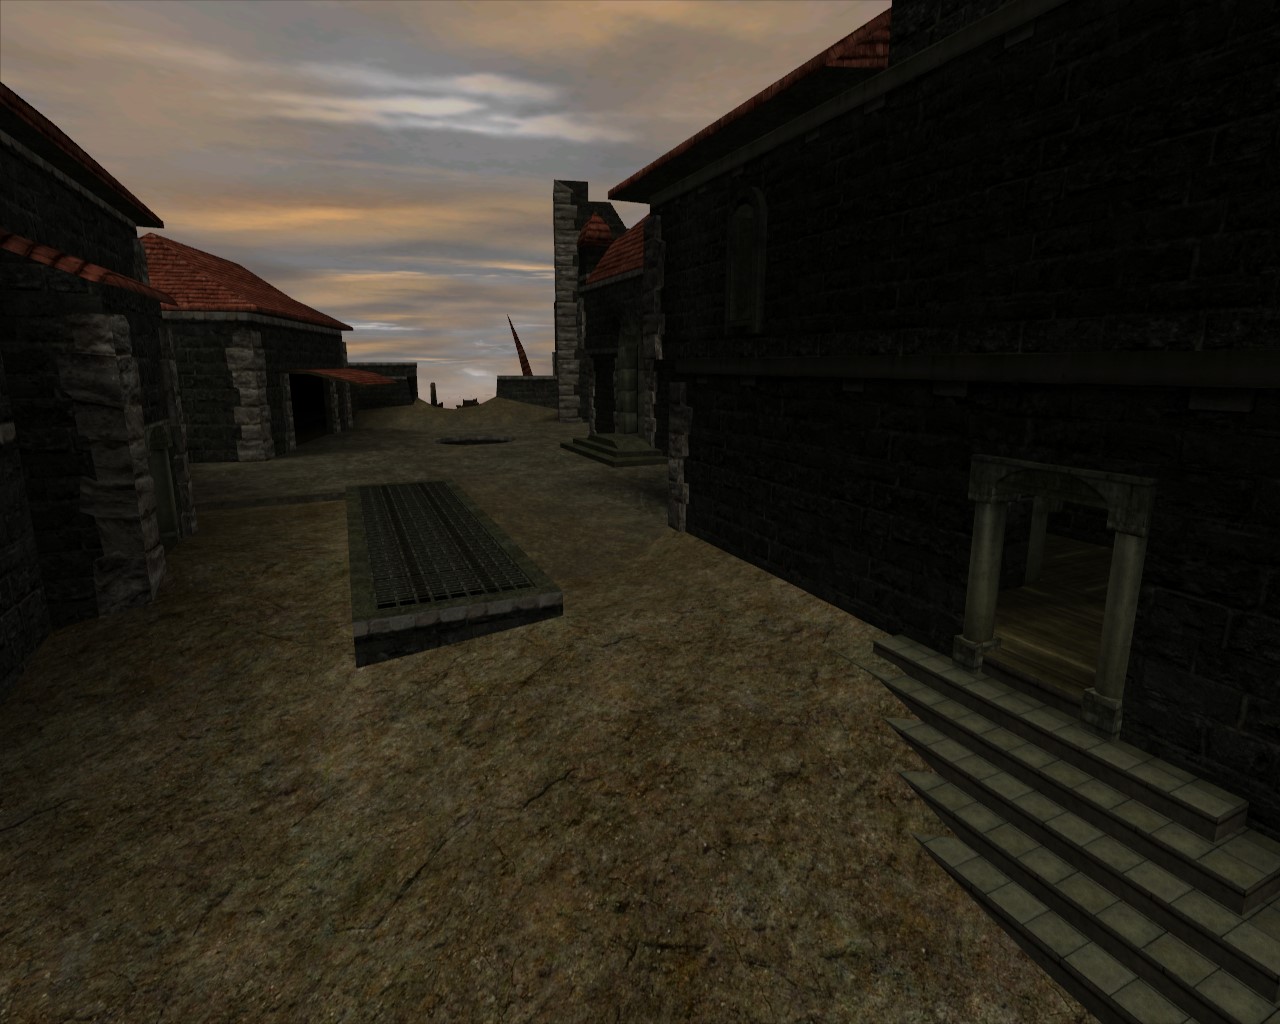 Old camp. Gothic 1 old Camp. Gothic 2 Reloaded Mod. Готика 1 старый лагерь Уистлер. Готика лагерь Камп.